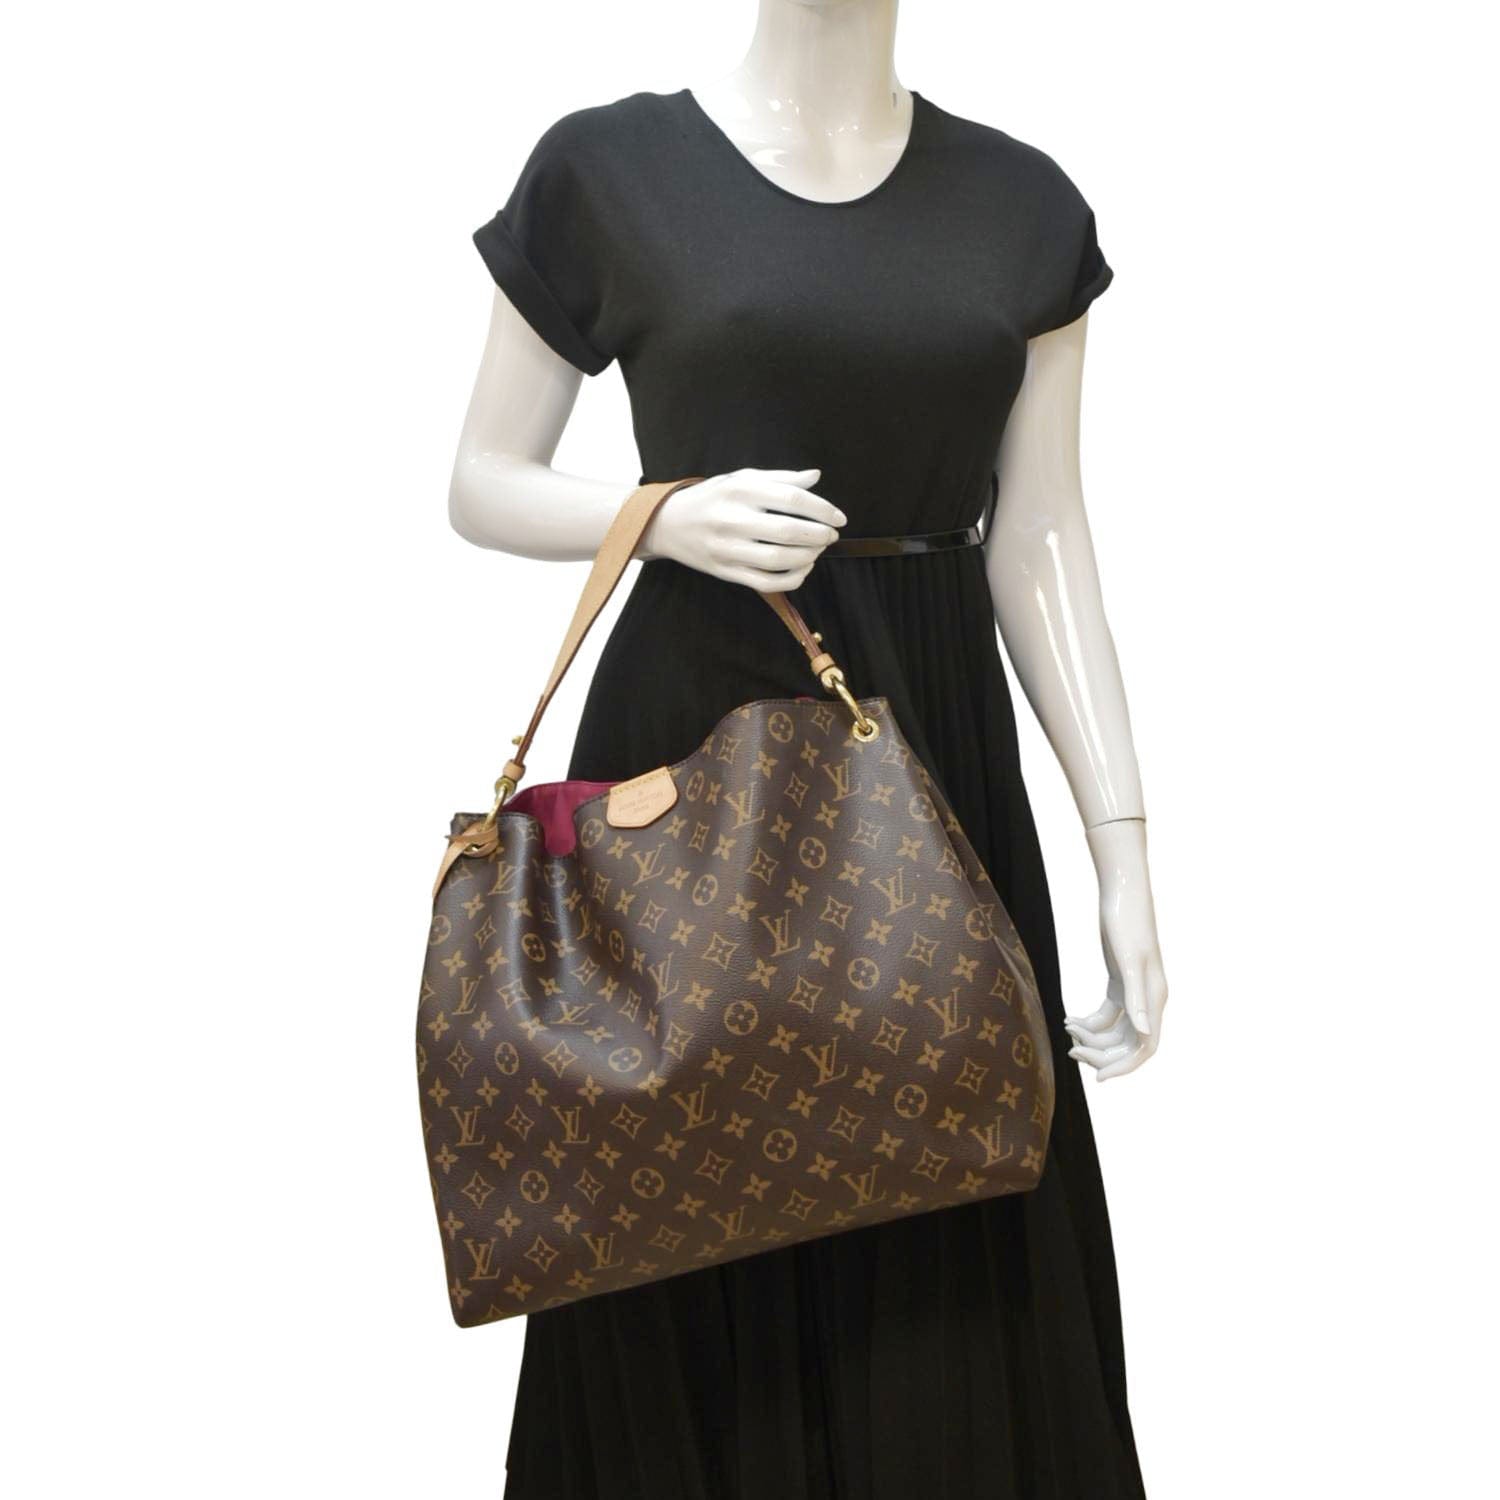 The Louis Vuitton Graceful bag is a bag that is perfect for daily use.